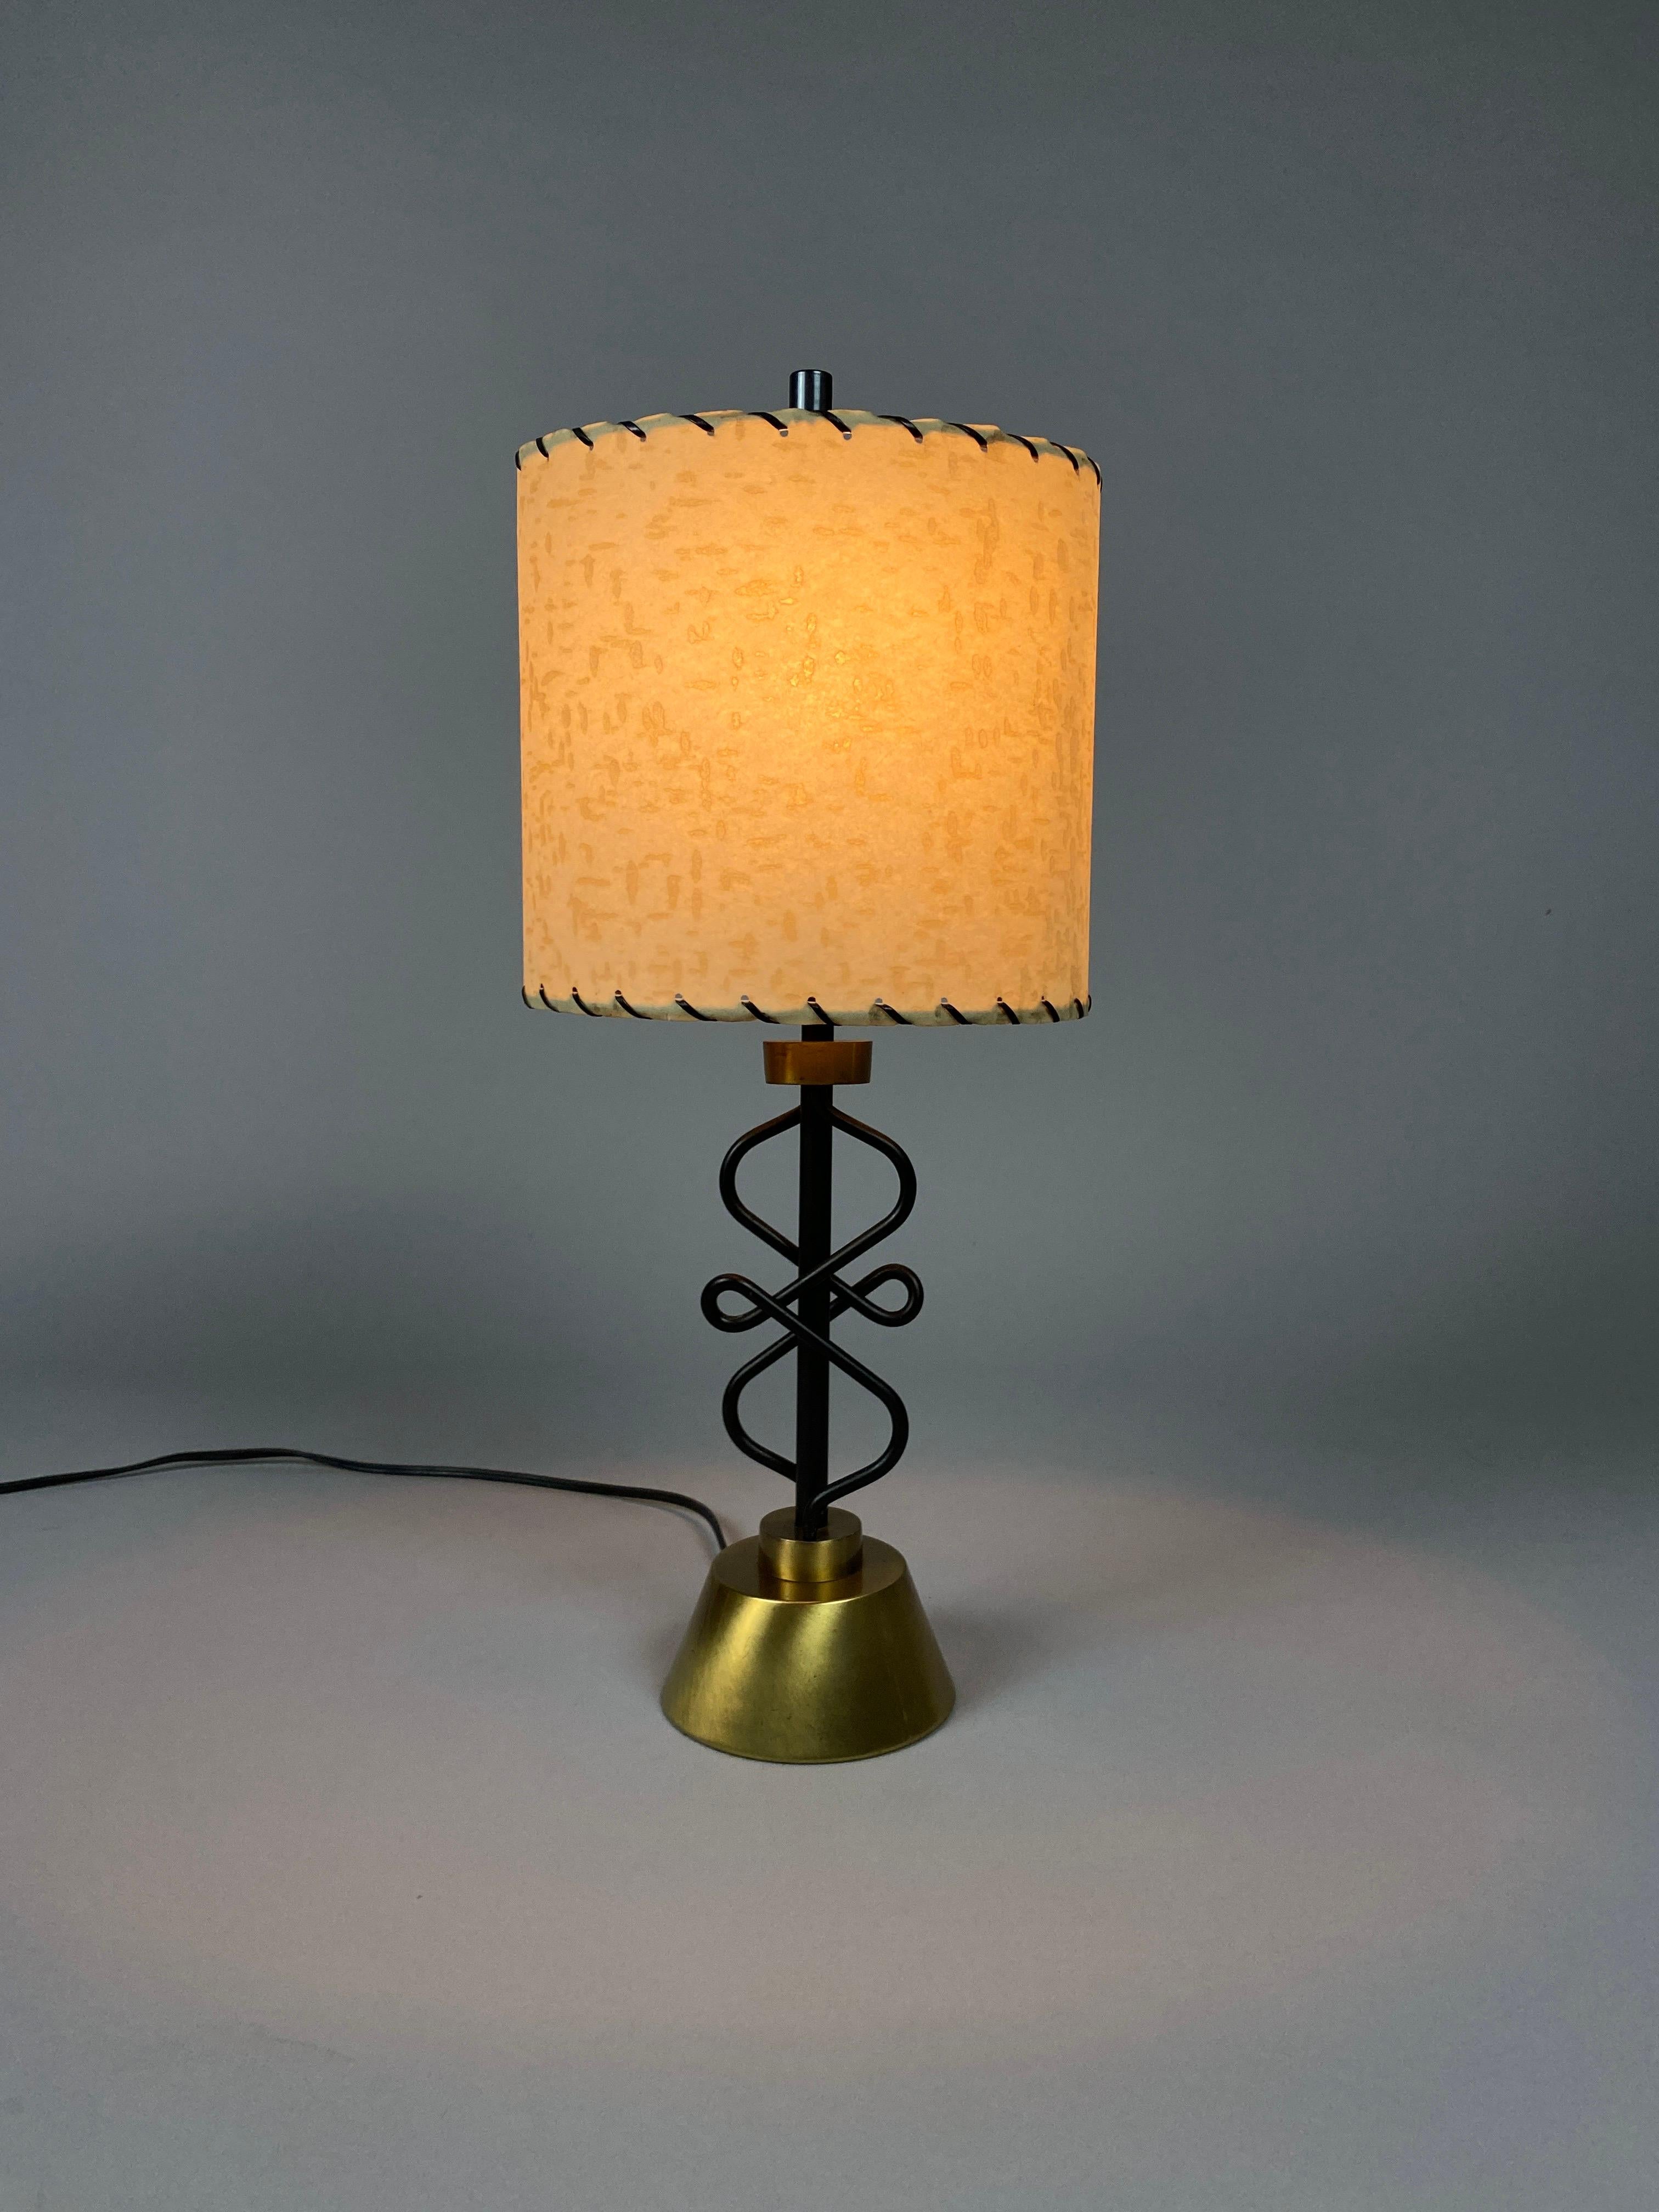 Introducing a timeless duo of sophistication and charm: the Mid-Century Table/Bedside Lamps by Majestic Lamp Co. Embrace the allure of mid-century design with these exquisite lamps that effortlessly blend style, craftsmanship, and